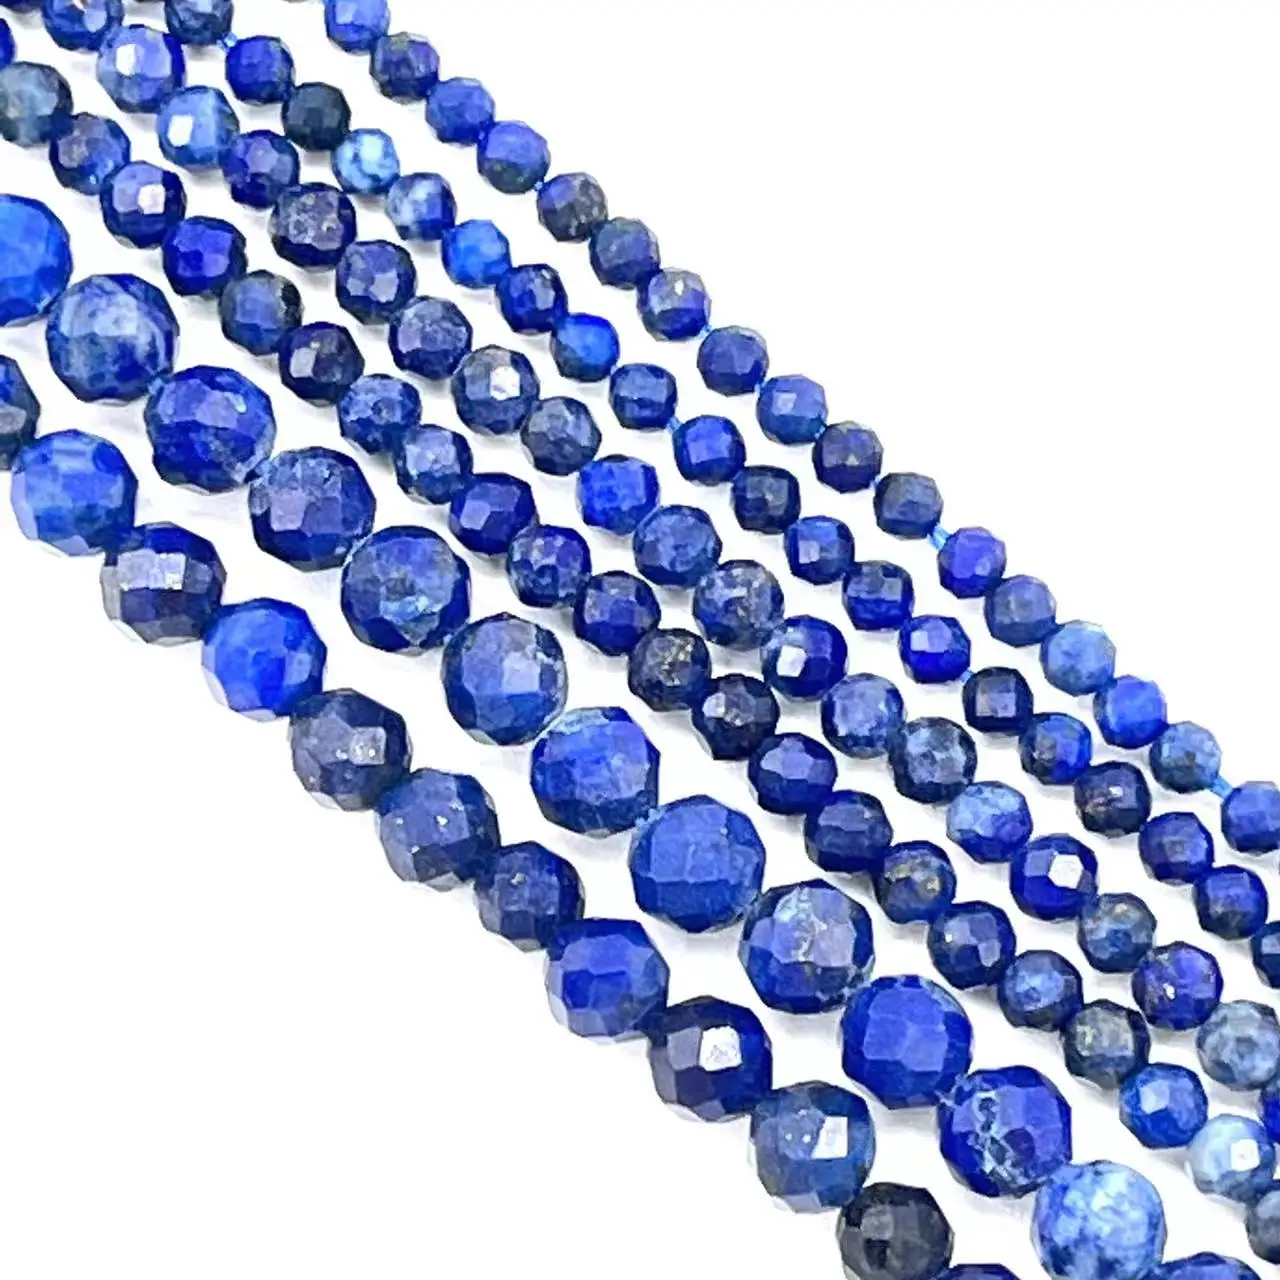 

2/3/4MM lapis lazuli Faceted Round Natural Stone Loose Spacer Beads For Jewelry Making DIY Bracelet Necklace 15” Wholesale